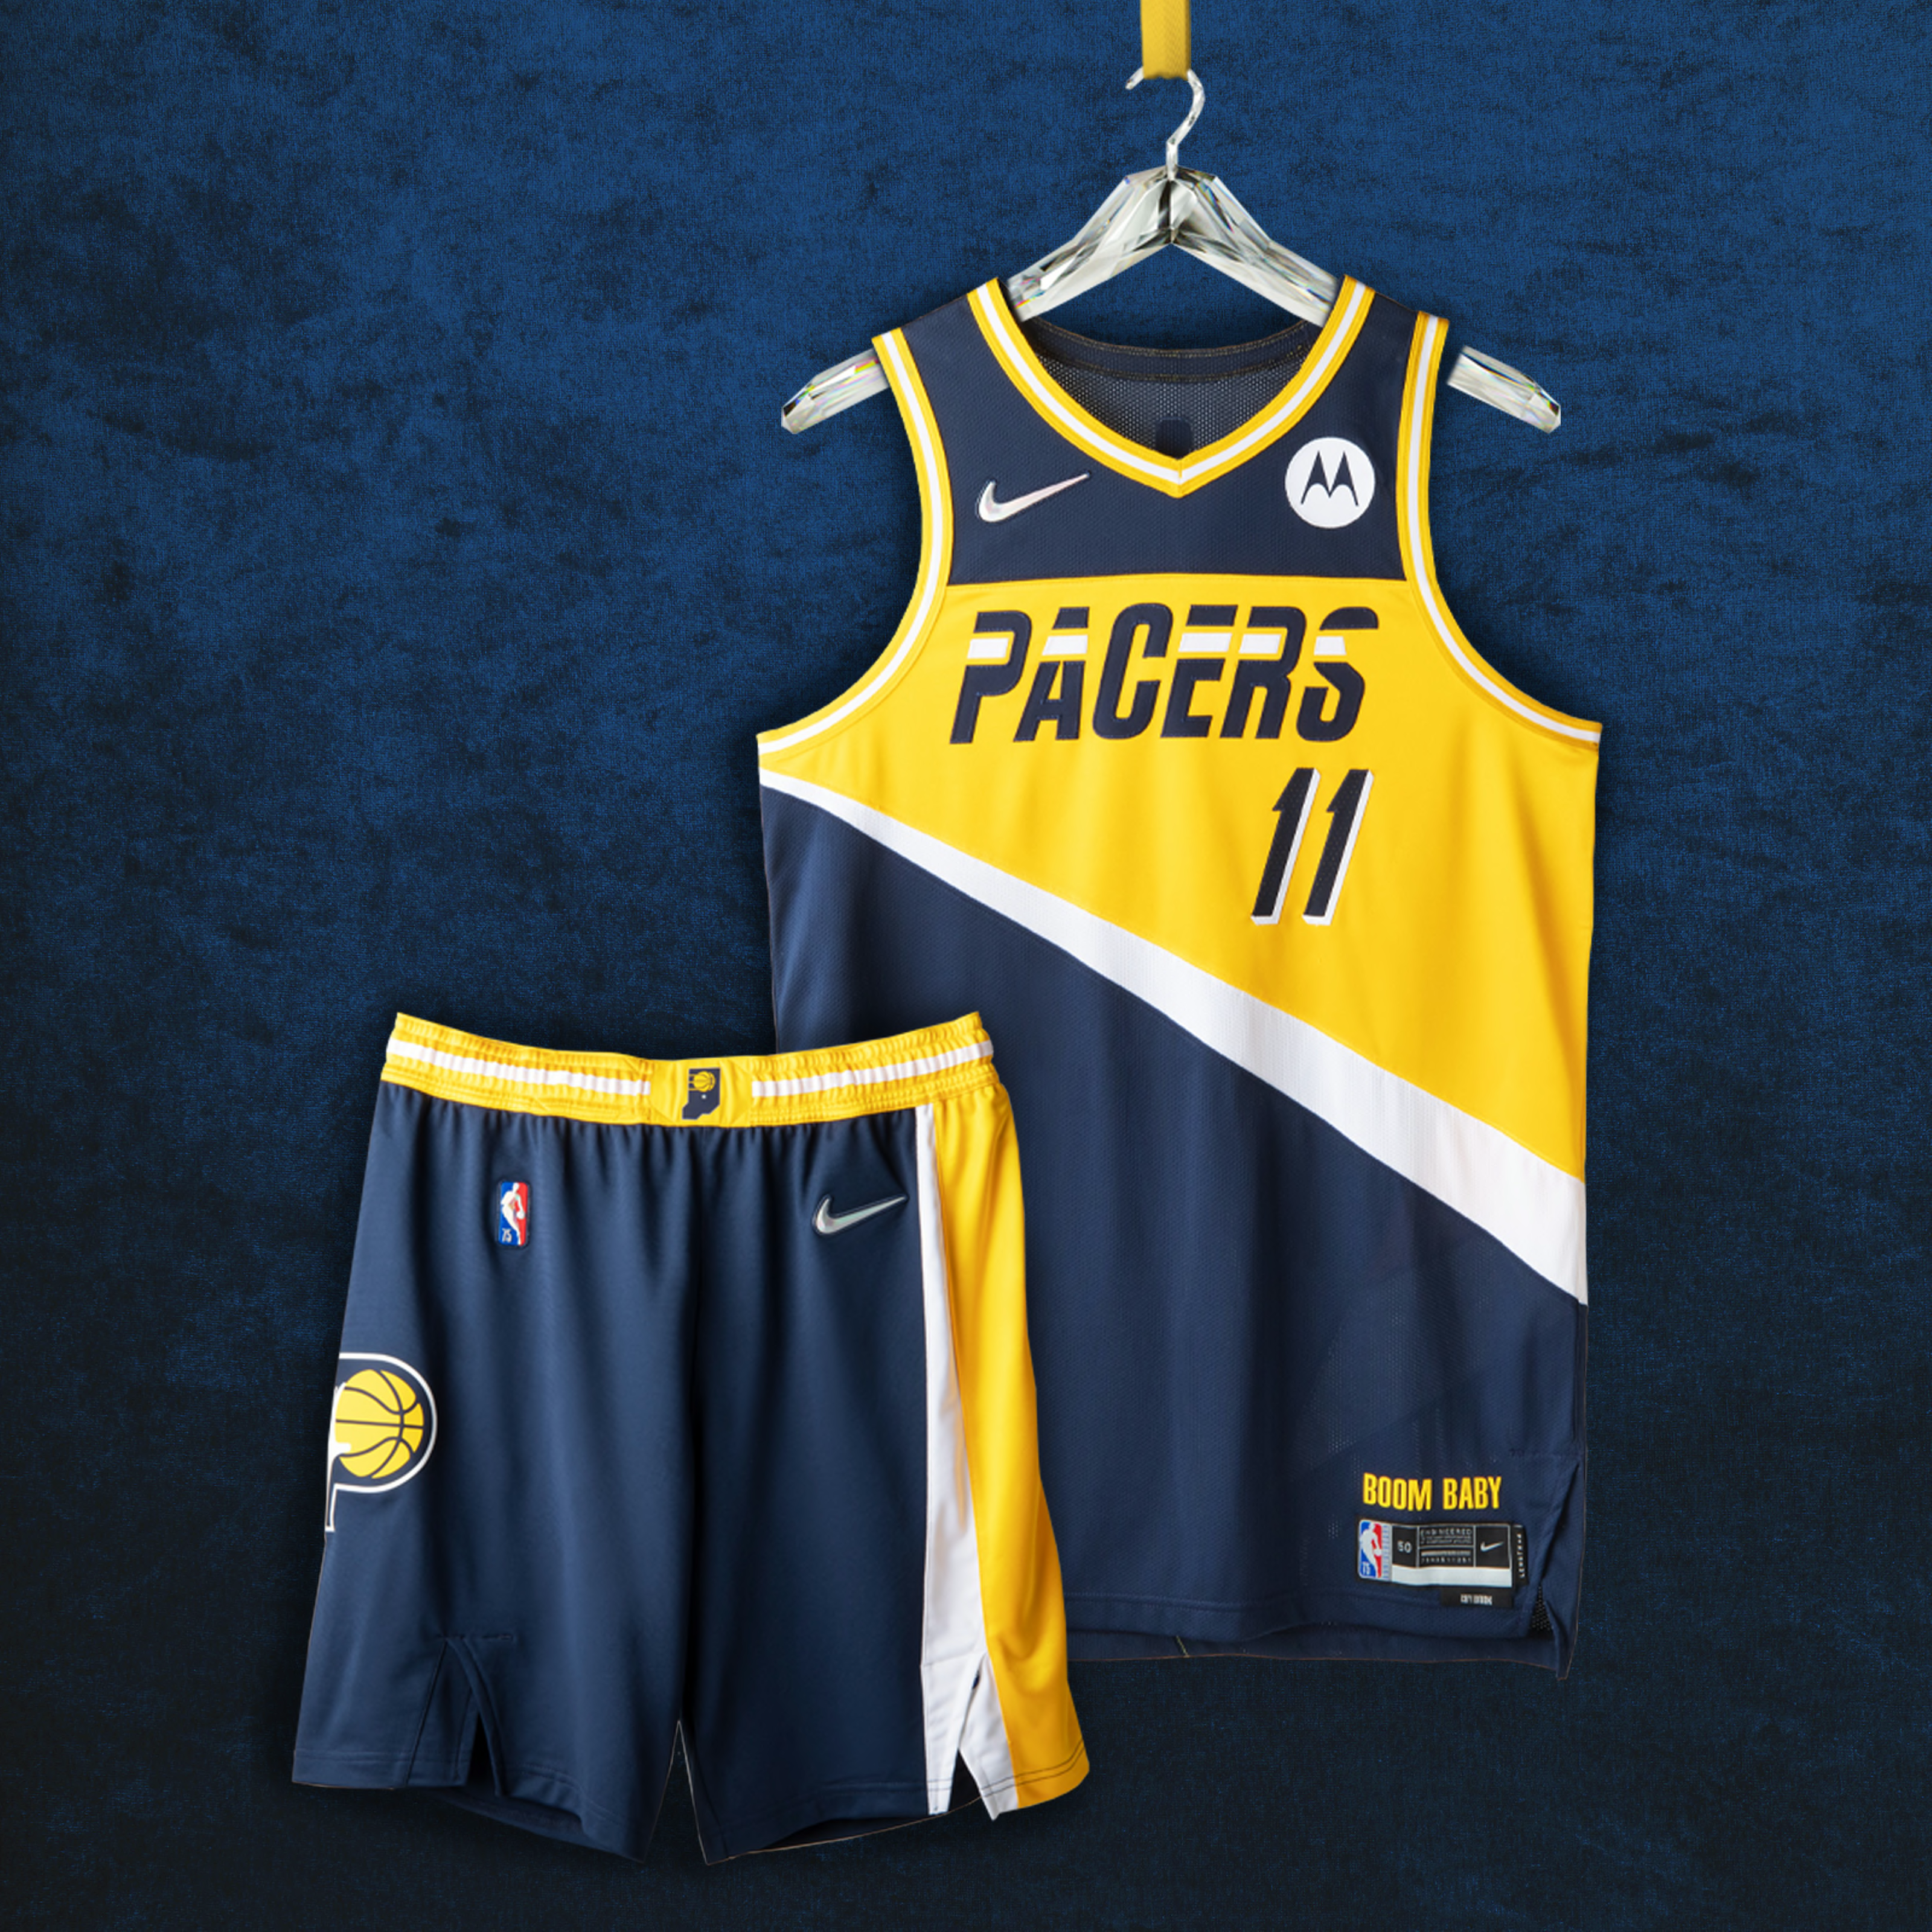 design pacer jersey